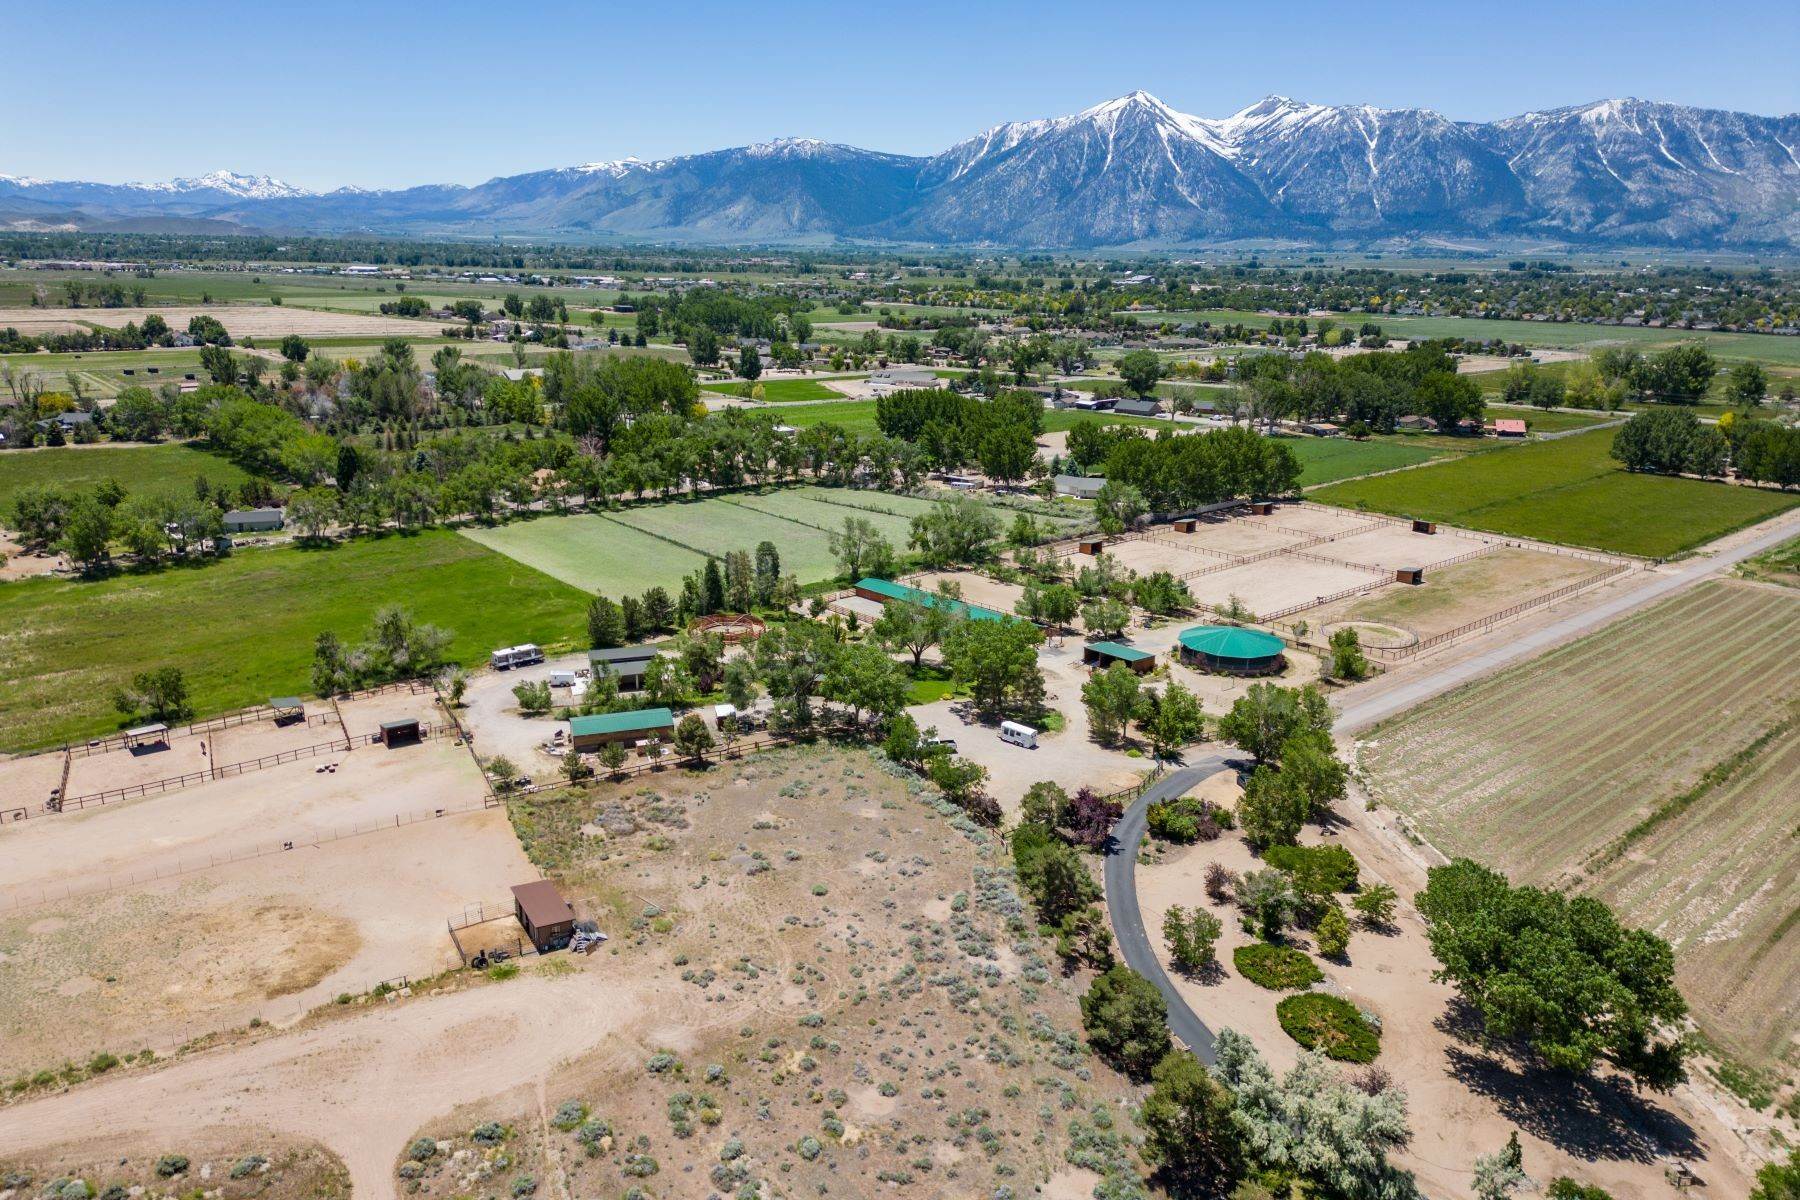 Single Family Homes for Active at Equestrian Estate 1581 Broken Arrow Rd Gardnerville, Nevada 89410 United States